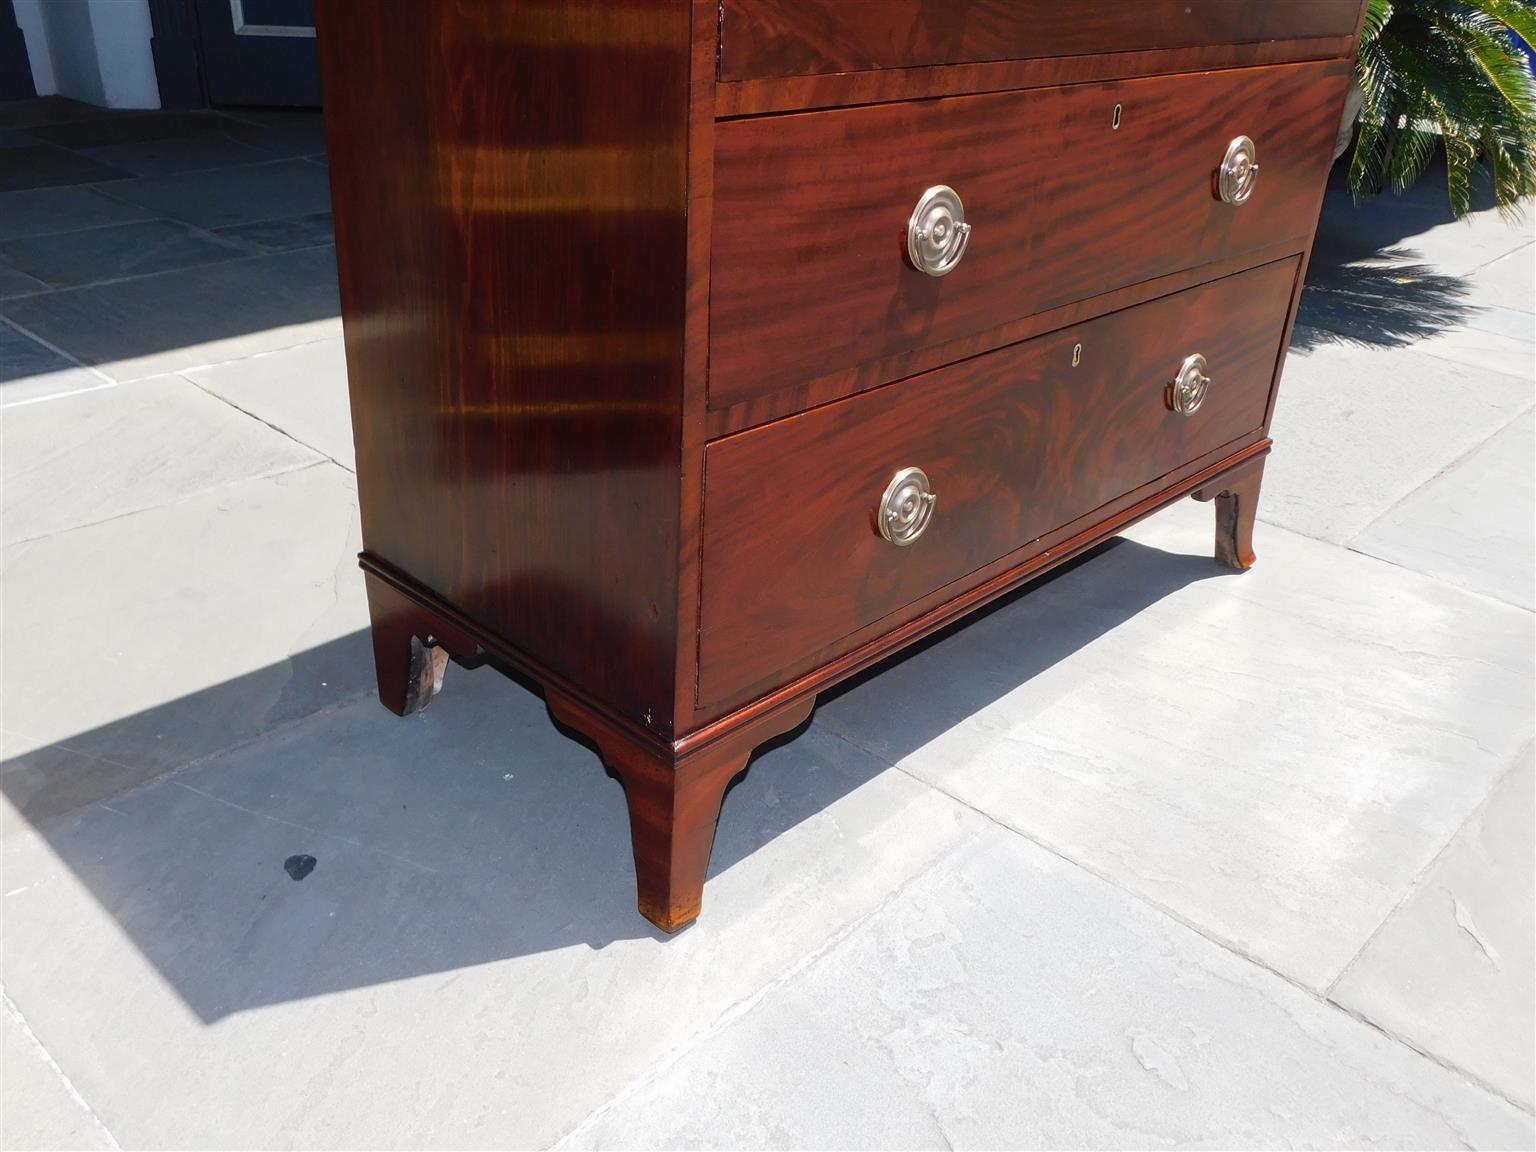 Late 18th Century American Hepplewhite Mahogany Reeded Chest of Drawers with Splayed Feet, C. 1790 For Sale